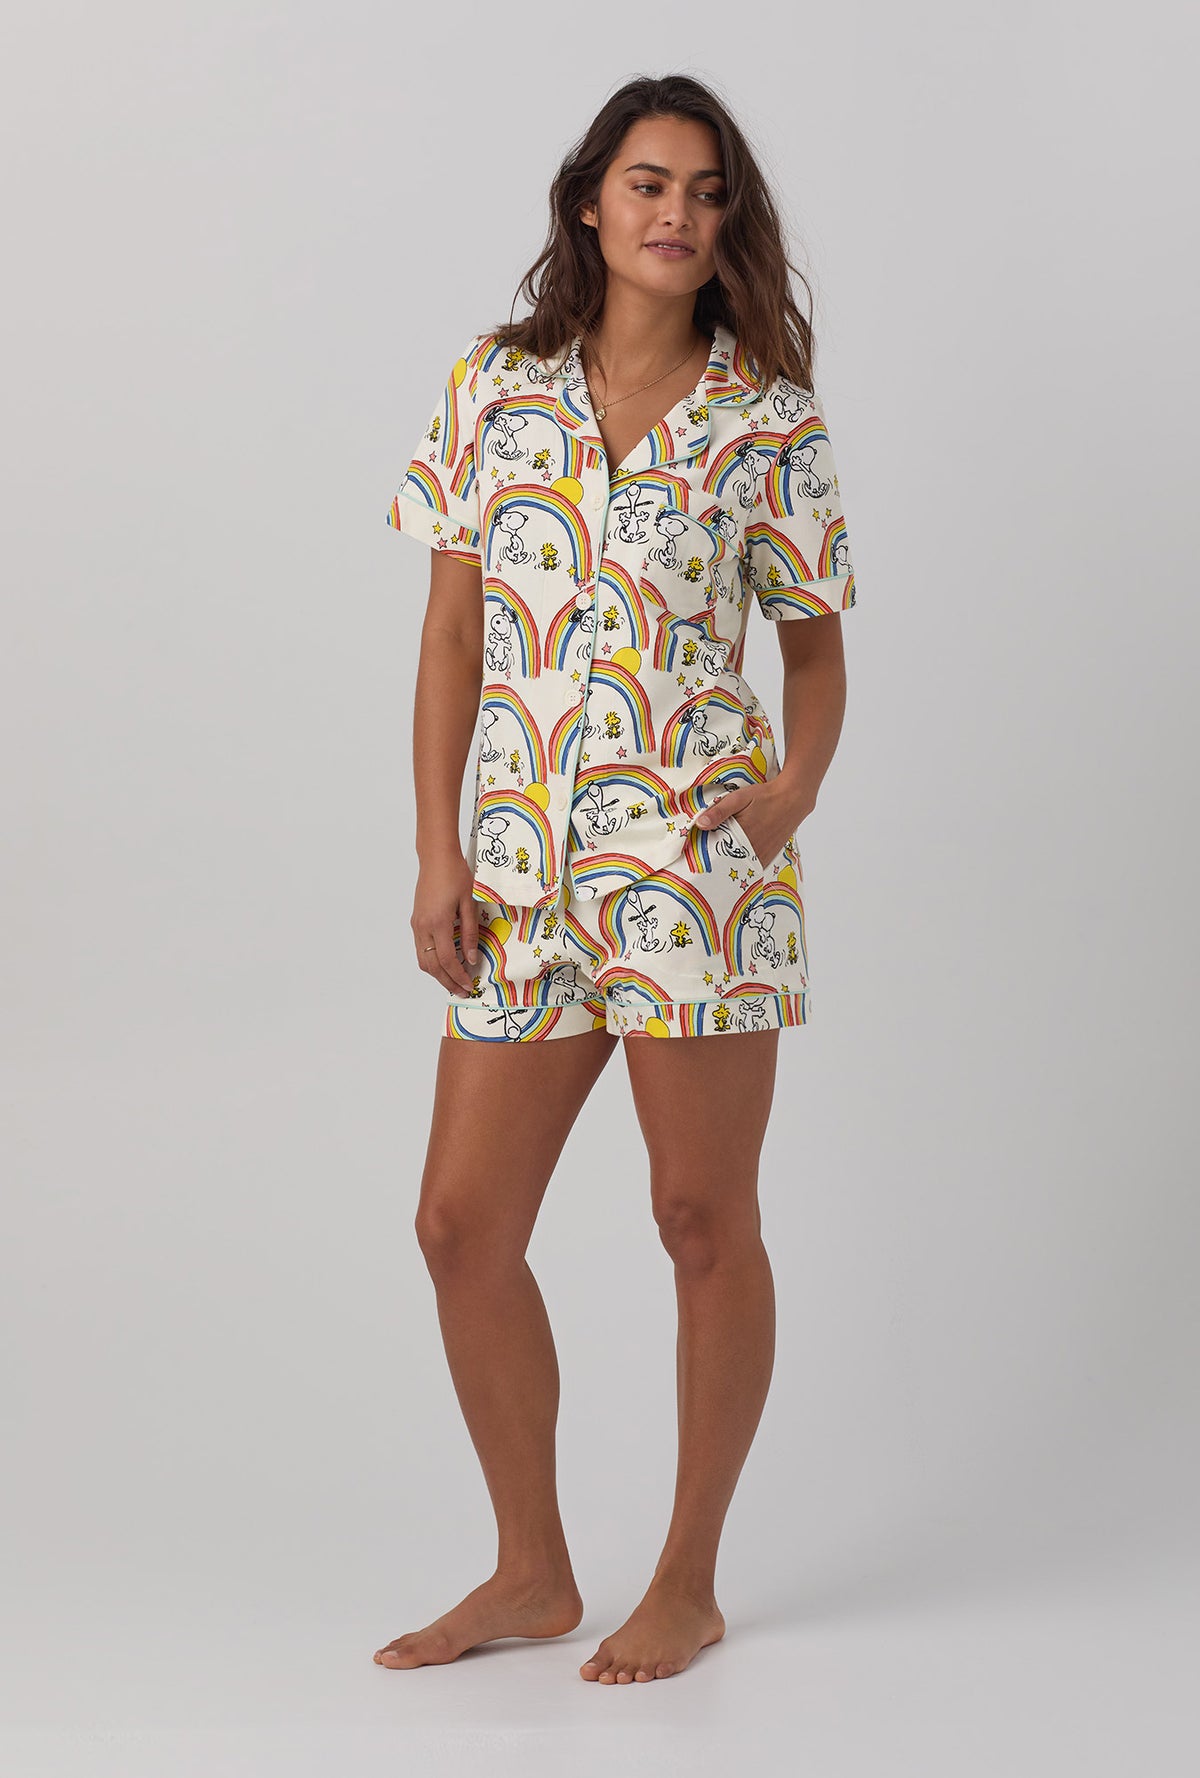 A lady wearing white Short Sleeve Classic Shorty Stretch Jersey PJ Set with Sunshine Snoopy  print.